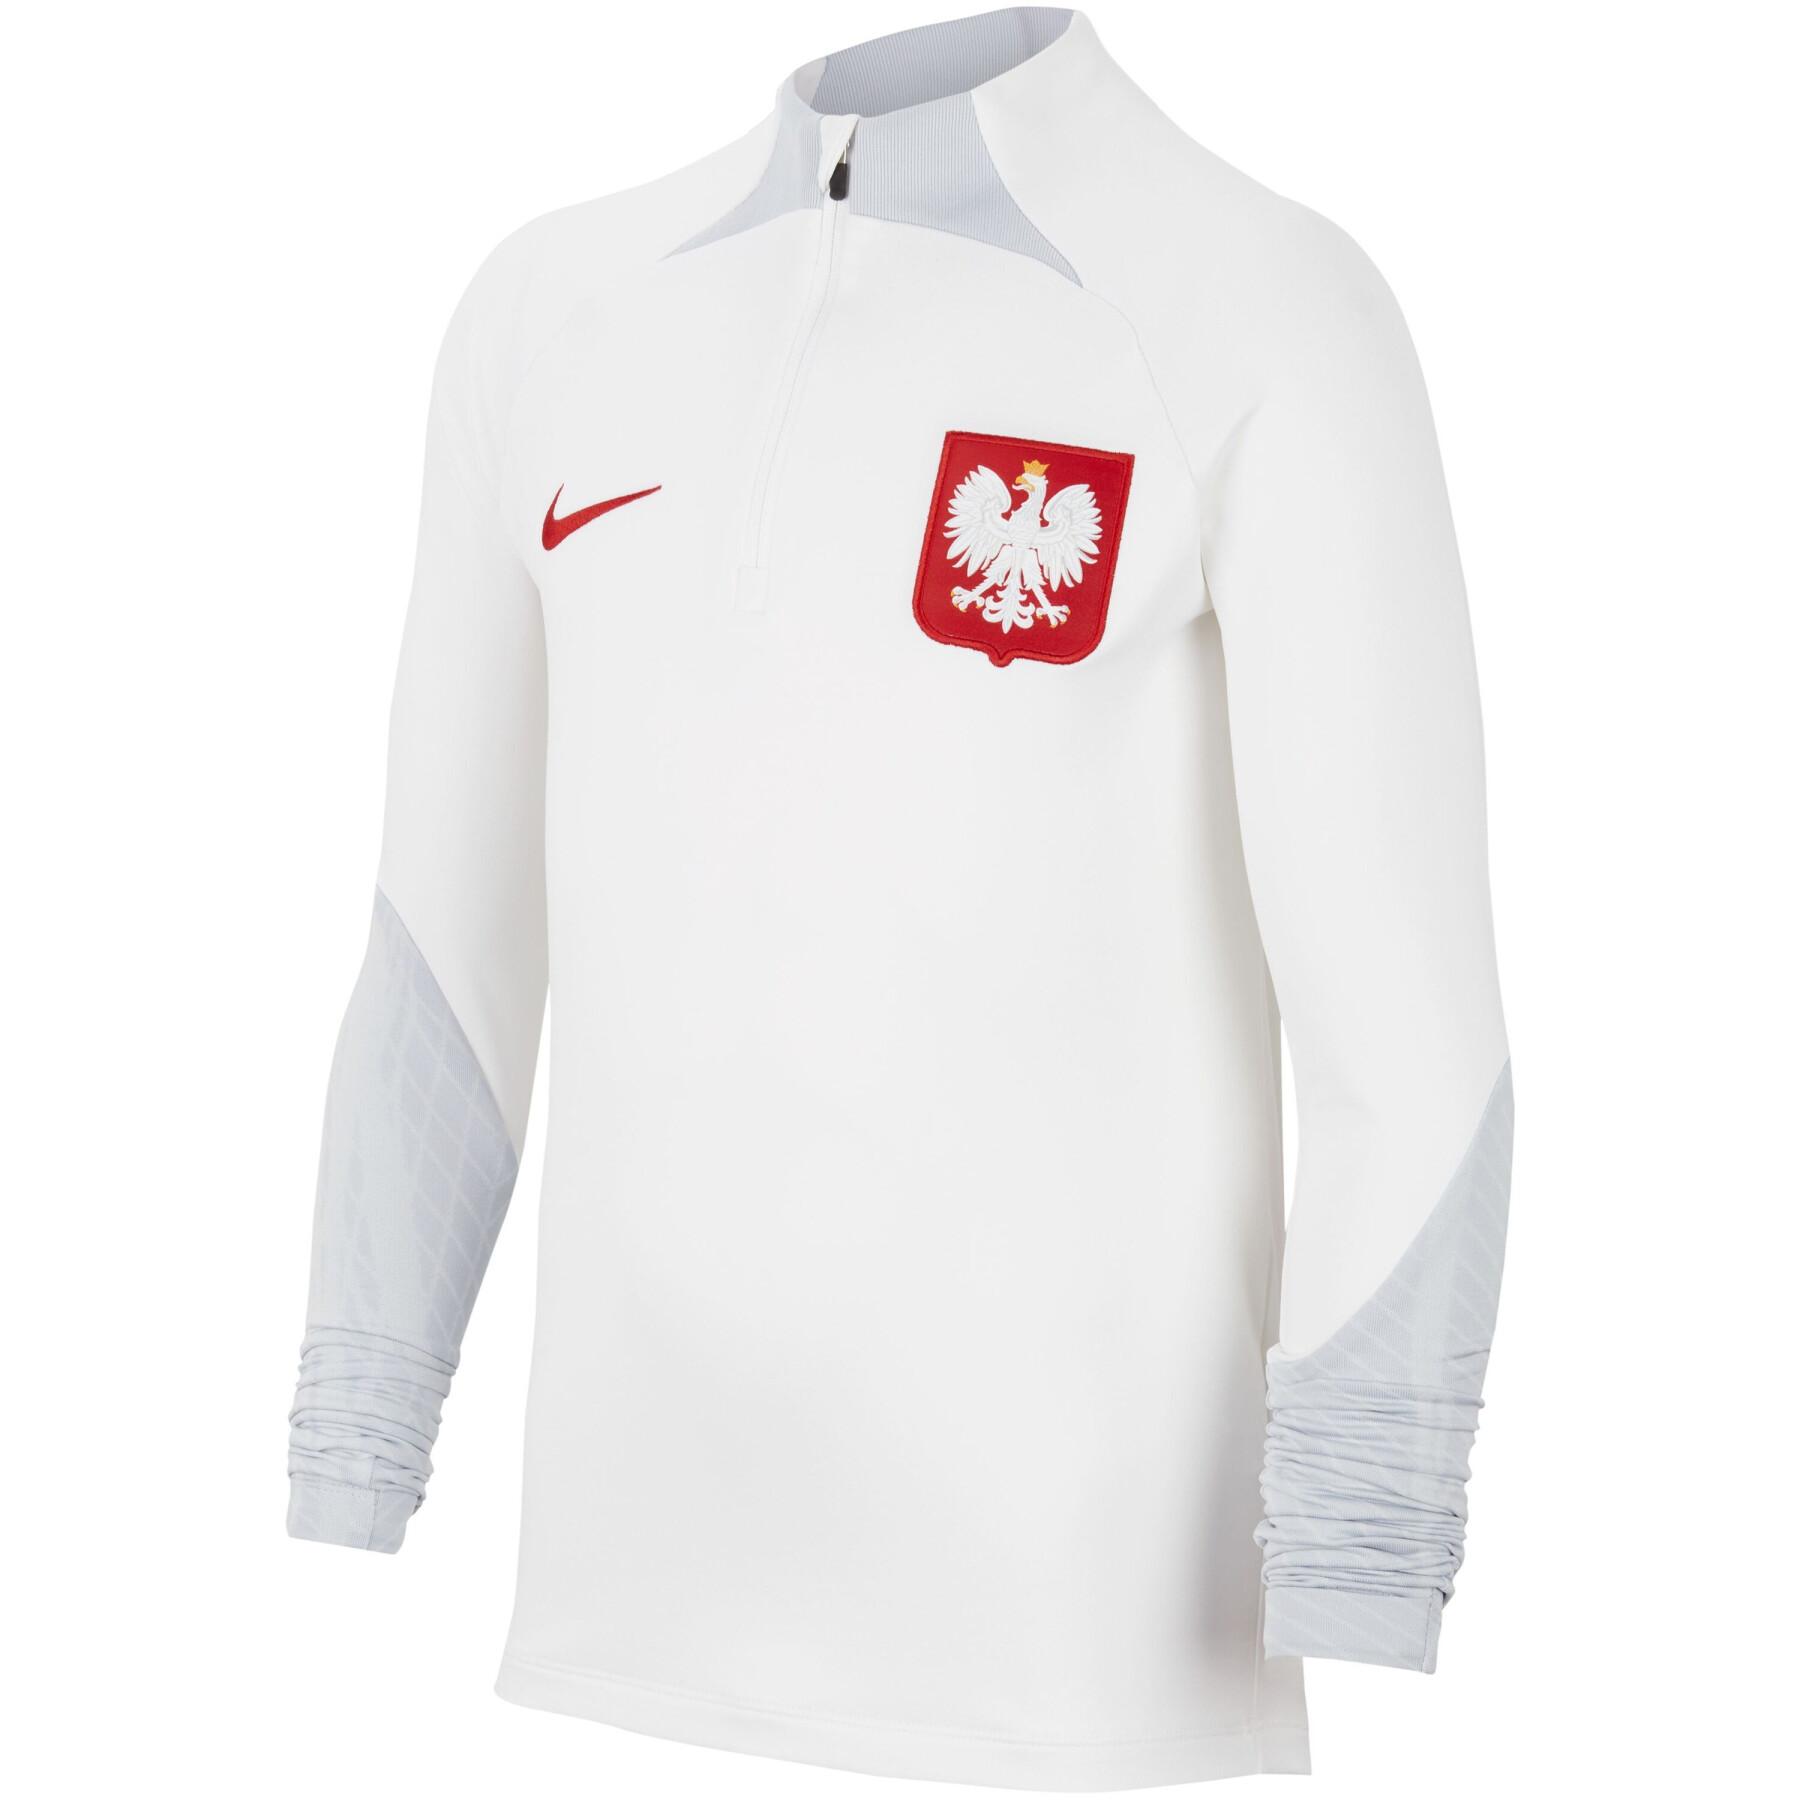 Children's World Cup 2022 training jersey Pologne